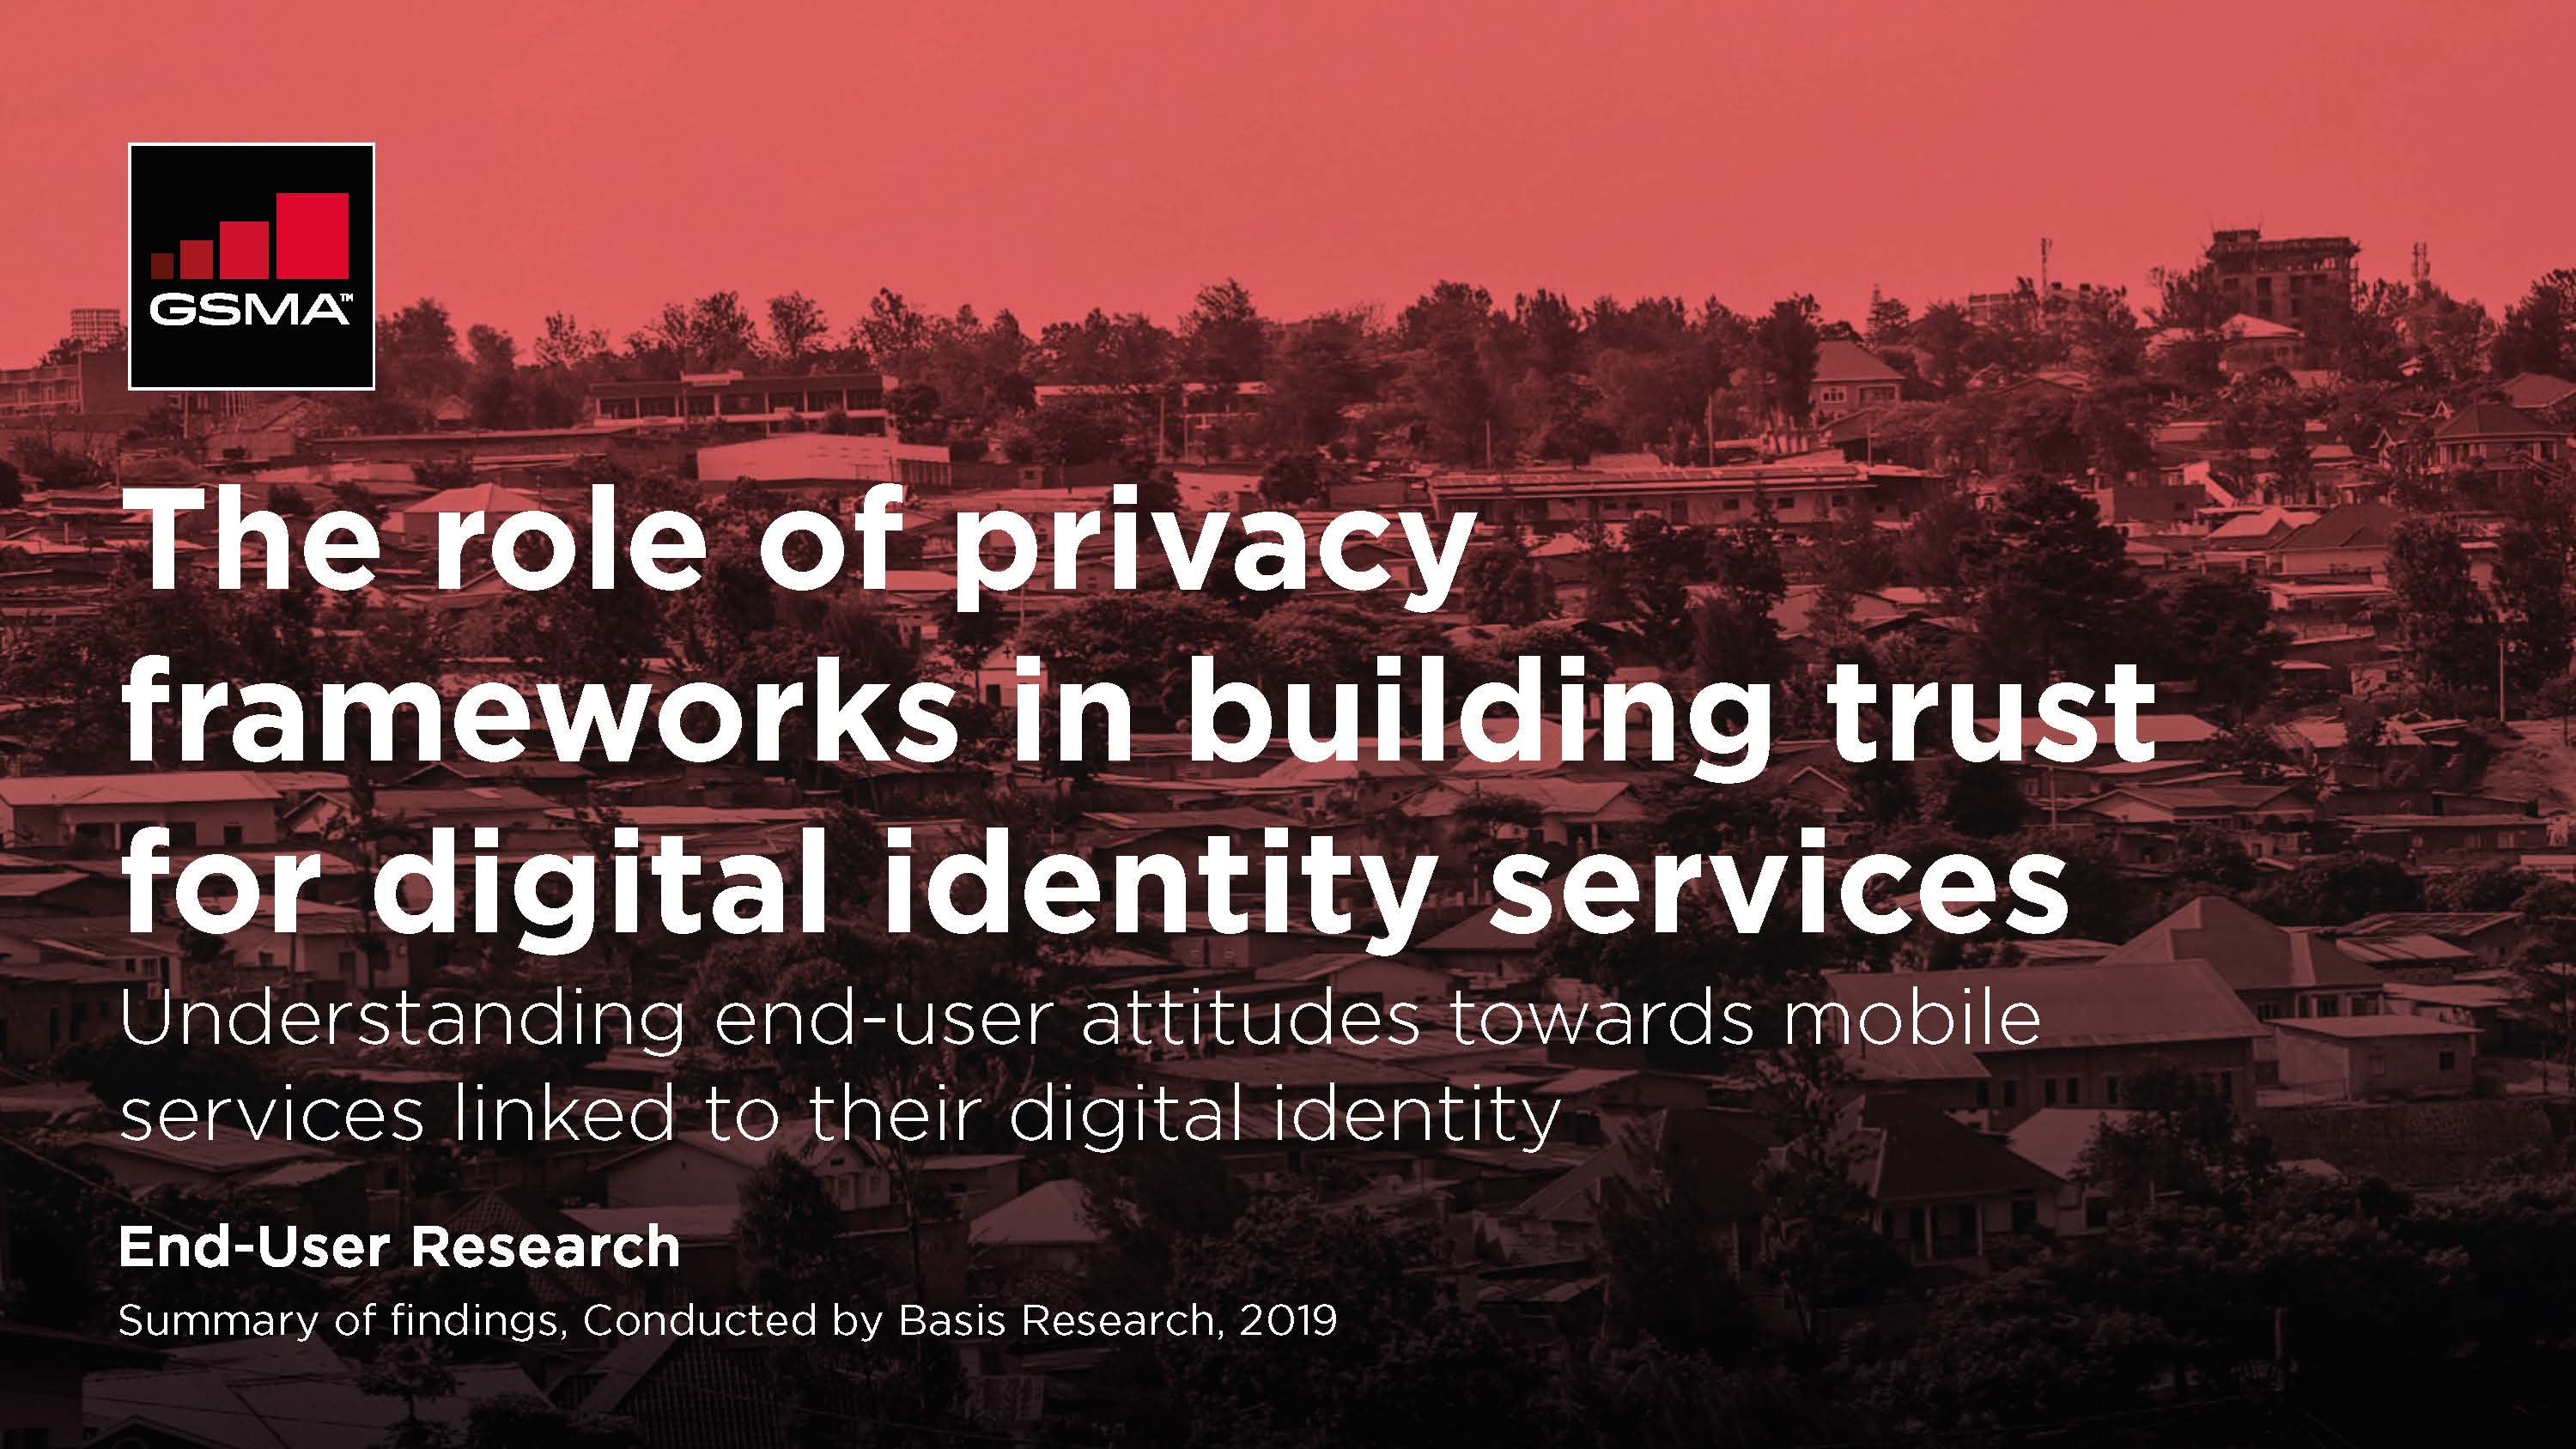 The role of privacy frameworks in building trust for digital identity services image